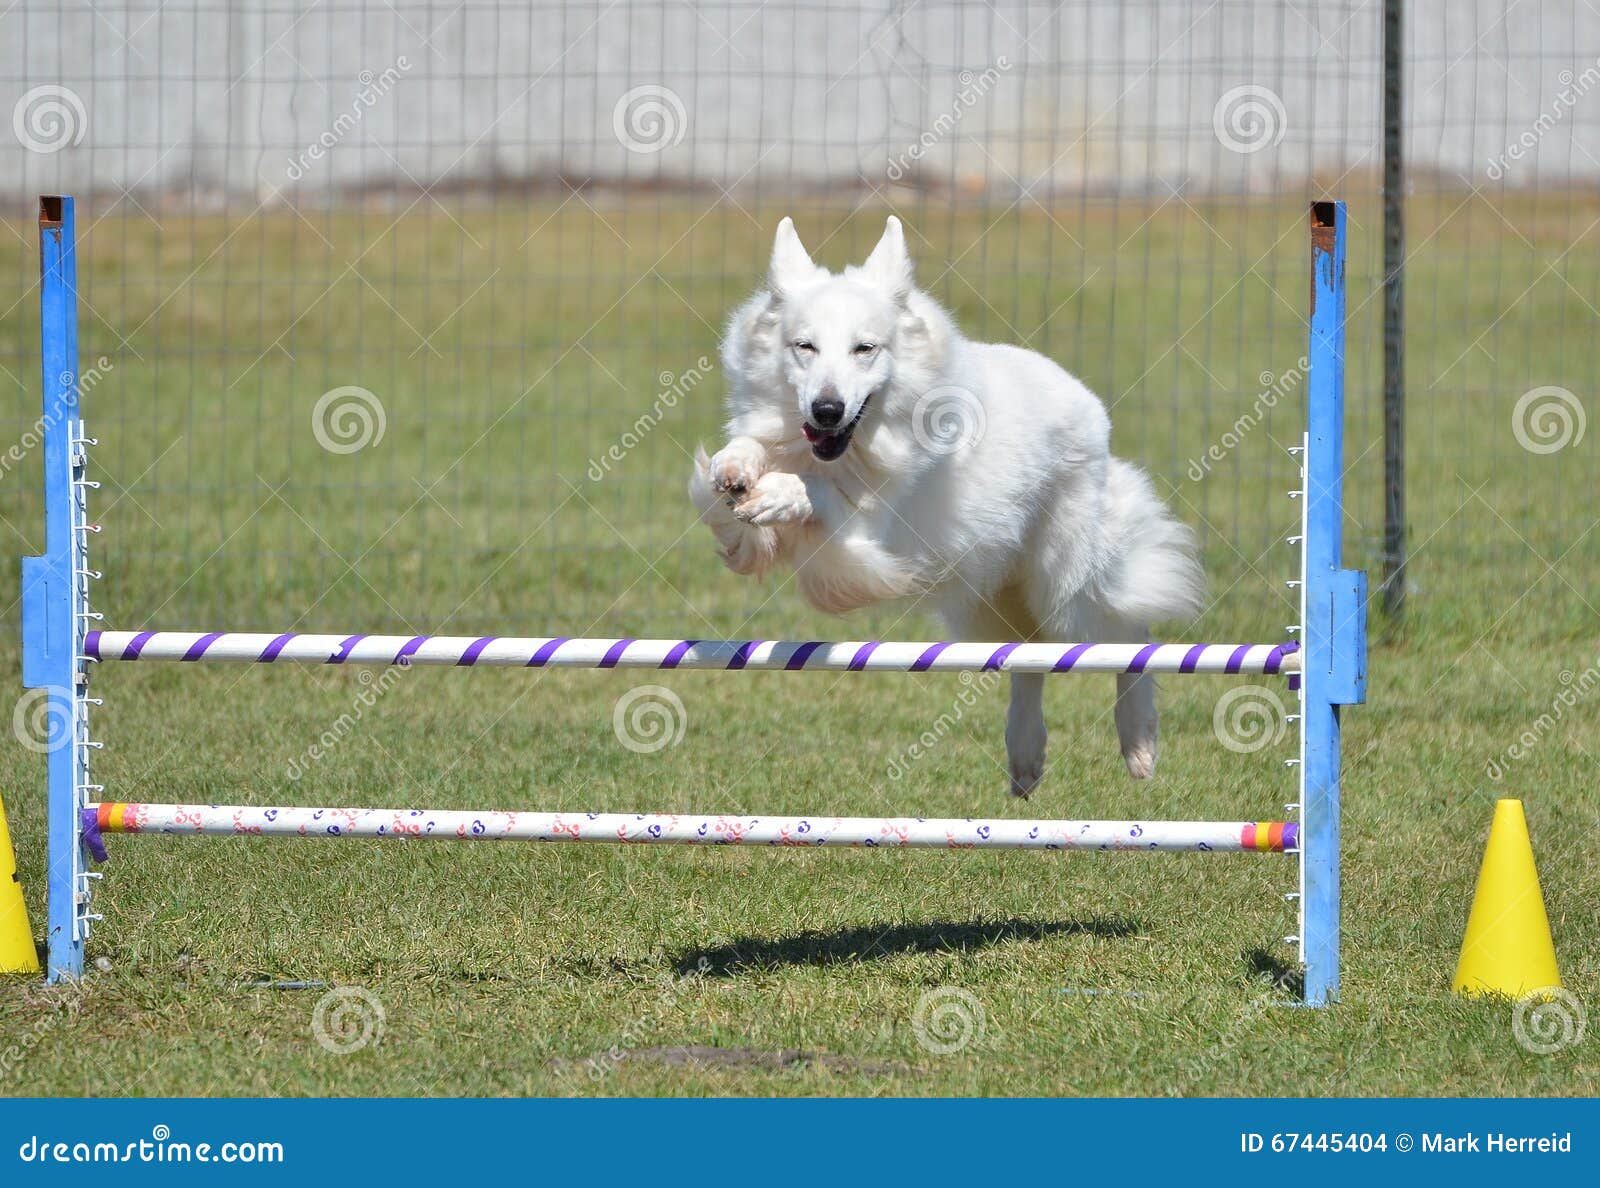 white shepherd at a dog agility trial